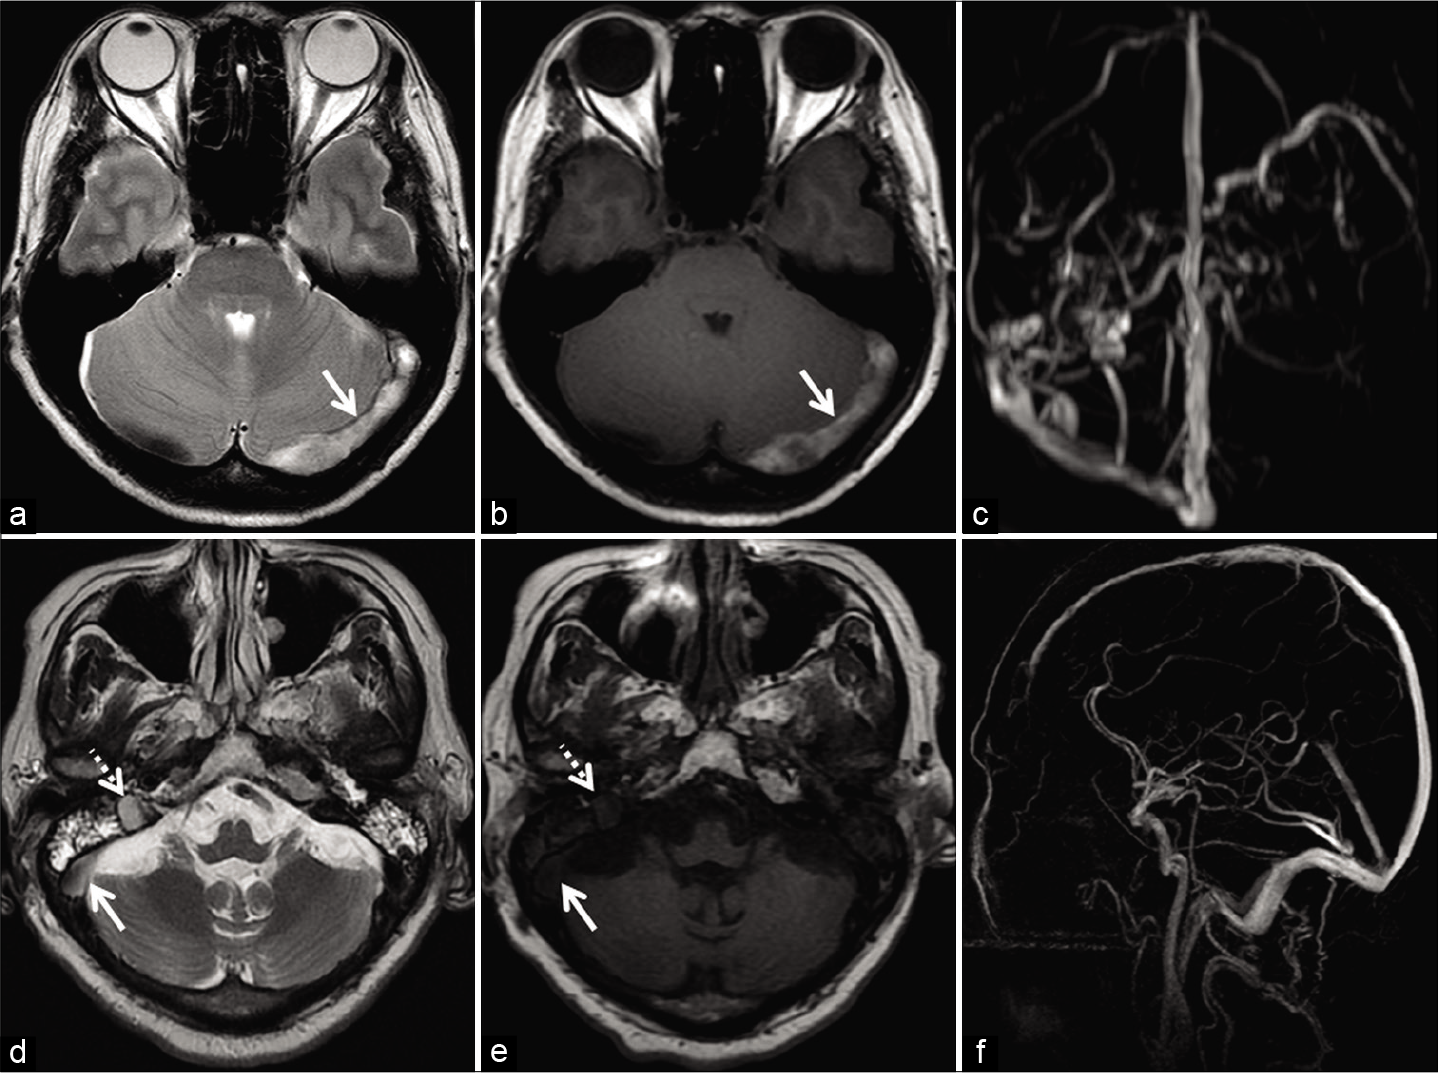 Deducing the etiology of loss of flow voids in two different patients. Patient 1 (a-c) was investigated for headache localized to the occipital region. Axial T2W image (a) and axial T1W image (b) show loss of flow void within the left transverse sinus (arrow). Maximum intensity projection (MIP) of the phase-contrast magnetic resonance venography (PC-MRV) (c) confirms the occlusion. Patient 2 (d-f) was imaged for headache associated with blurring of vision. Axial T2W image (d) shows loss of flow void within the right transverse sinus (solid arrow) and sigmoid sinus (dotted arrow). Corresponding axial T1W image (e) shows isointense signal intensity within the sinuses. Sagittal MIP of the PC-MRV (f) confirms patency of the sinuses. The signal alteration is therefore attributed to slow flow.